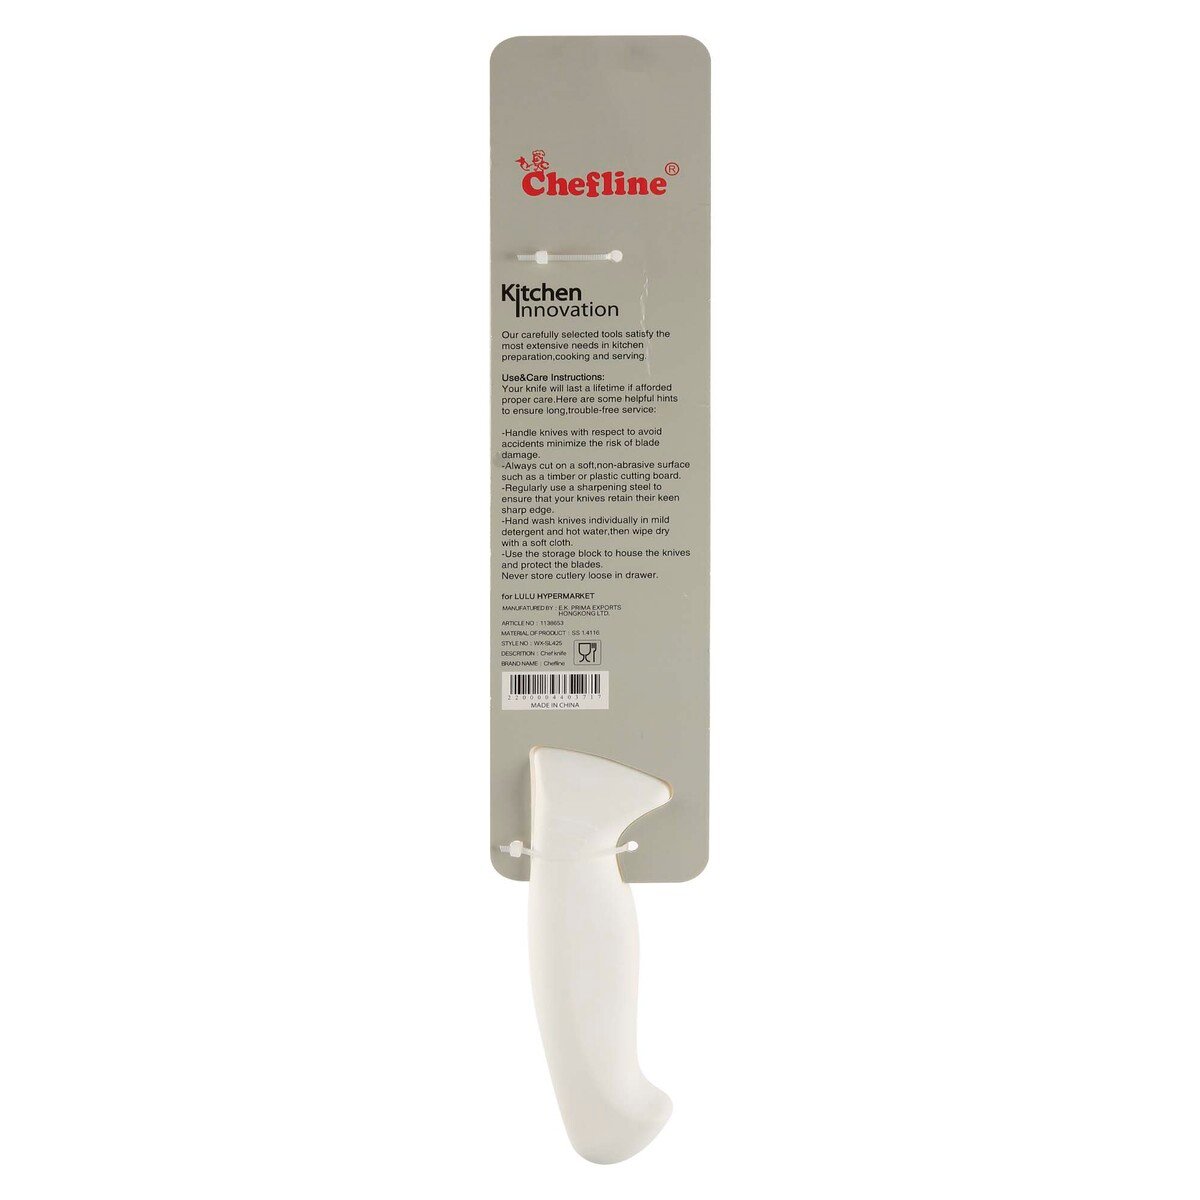 Chefline Chef's Knife, 8 Inches, WX-SL425